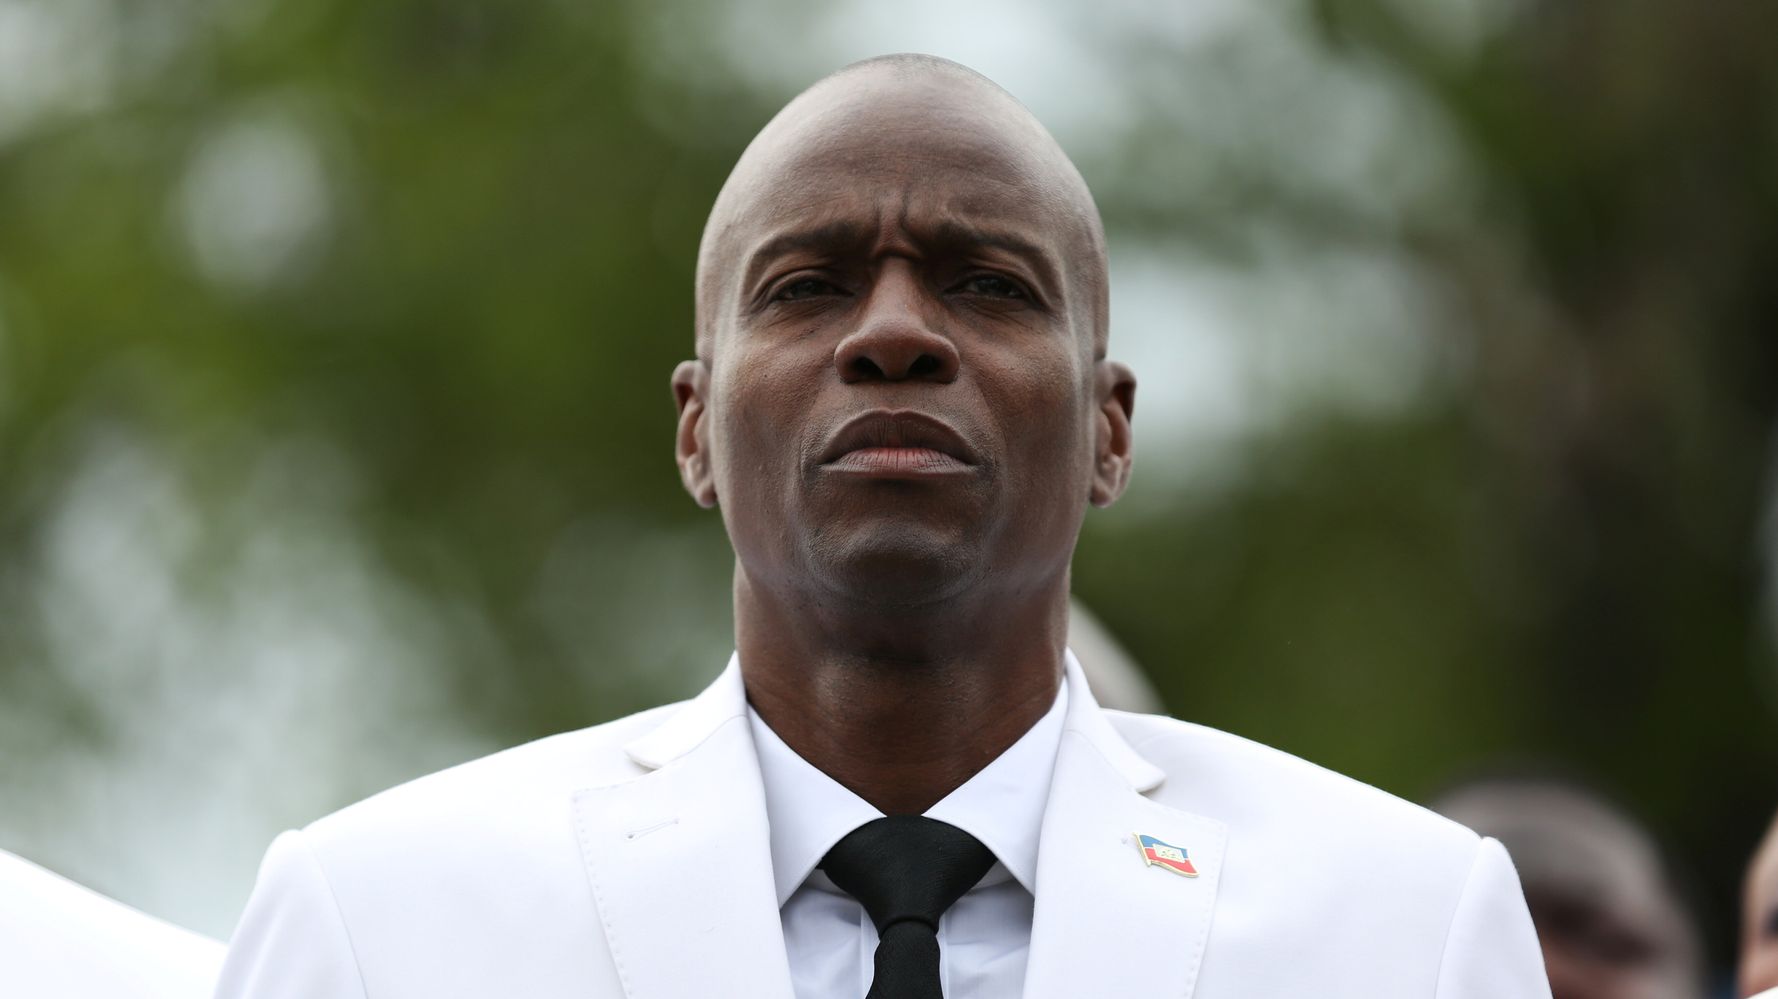 Haitian President Jovenel Moïse Assassinated At Home, Official Says